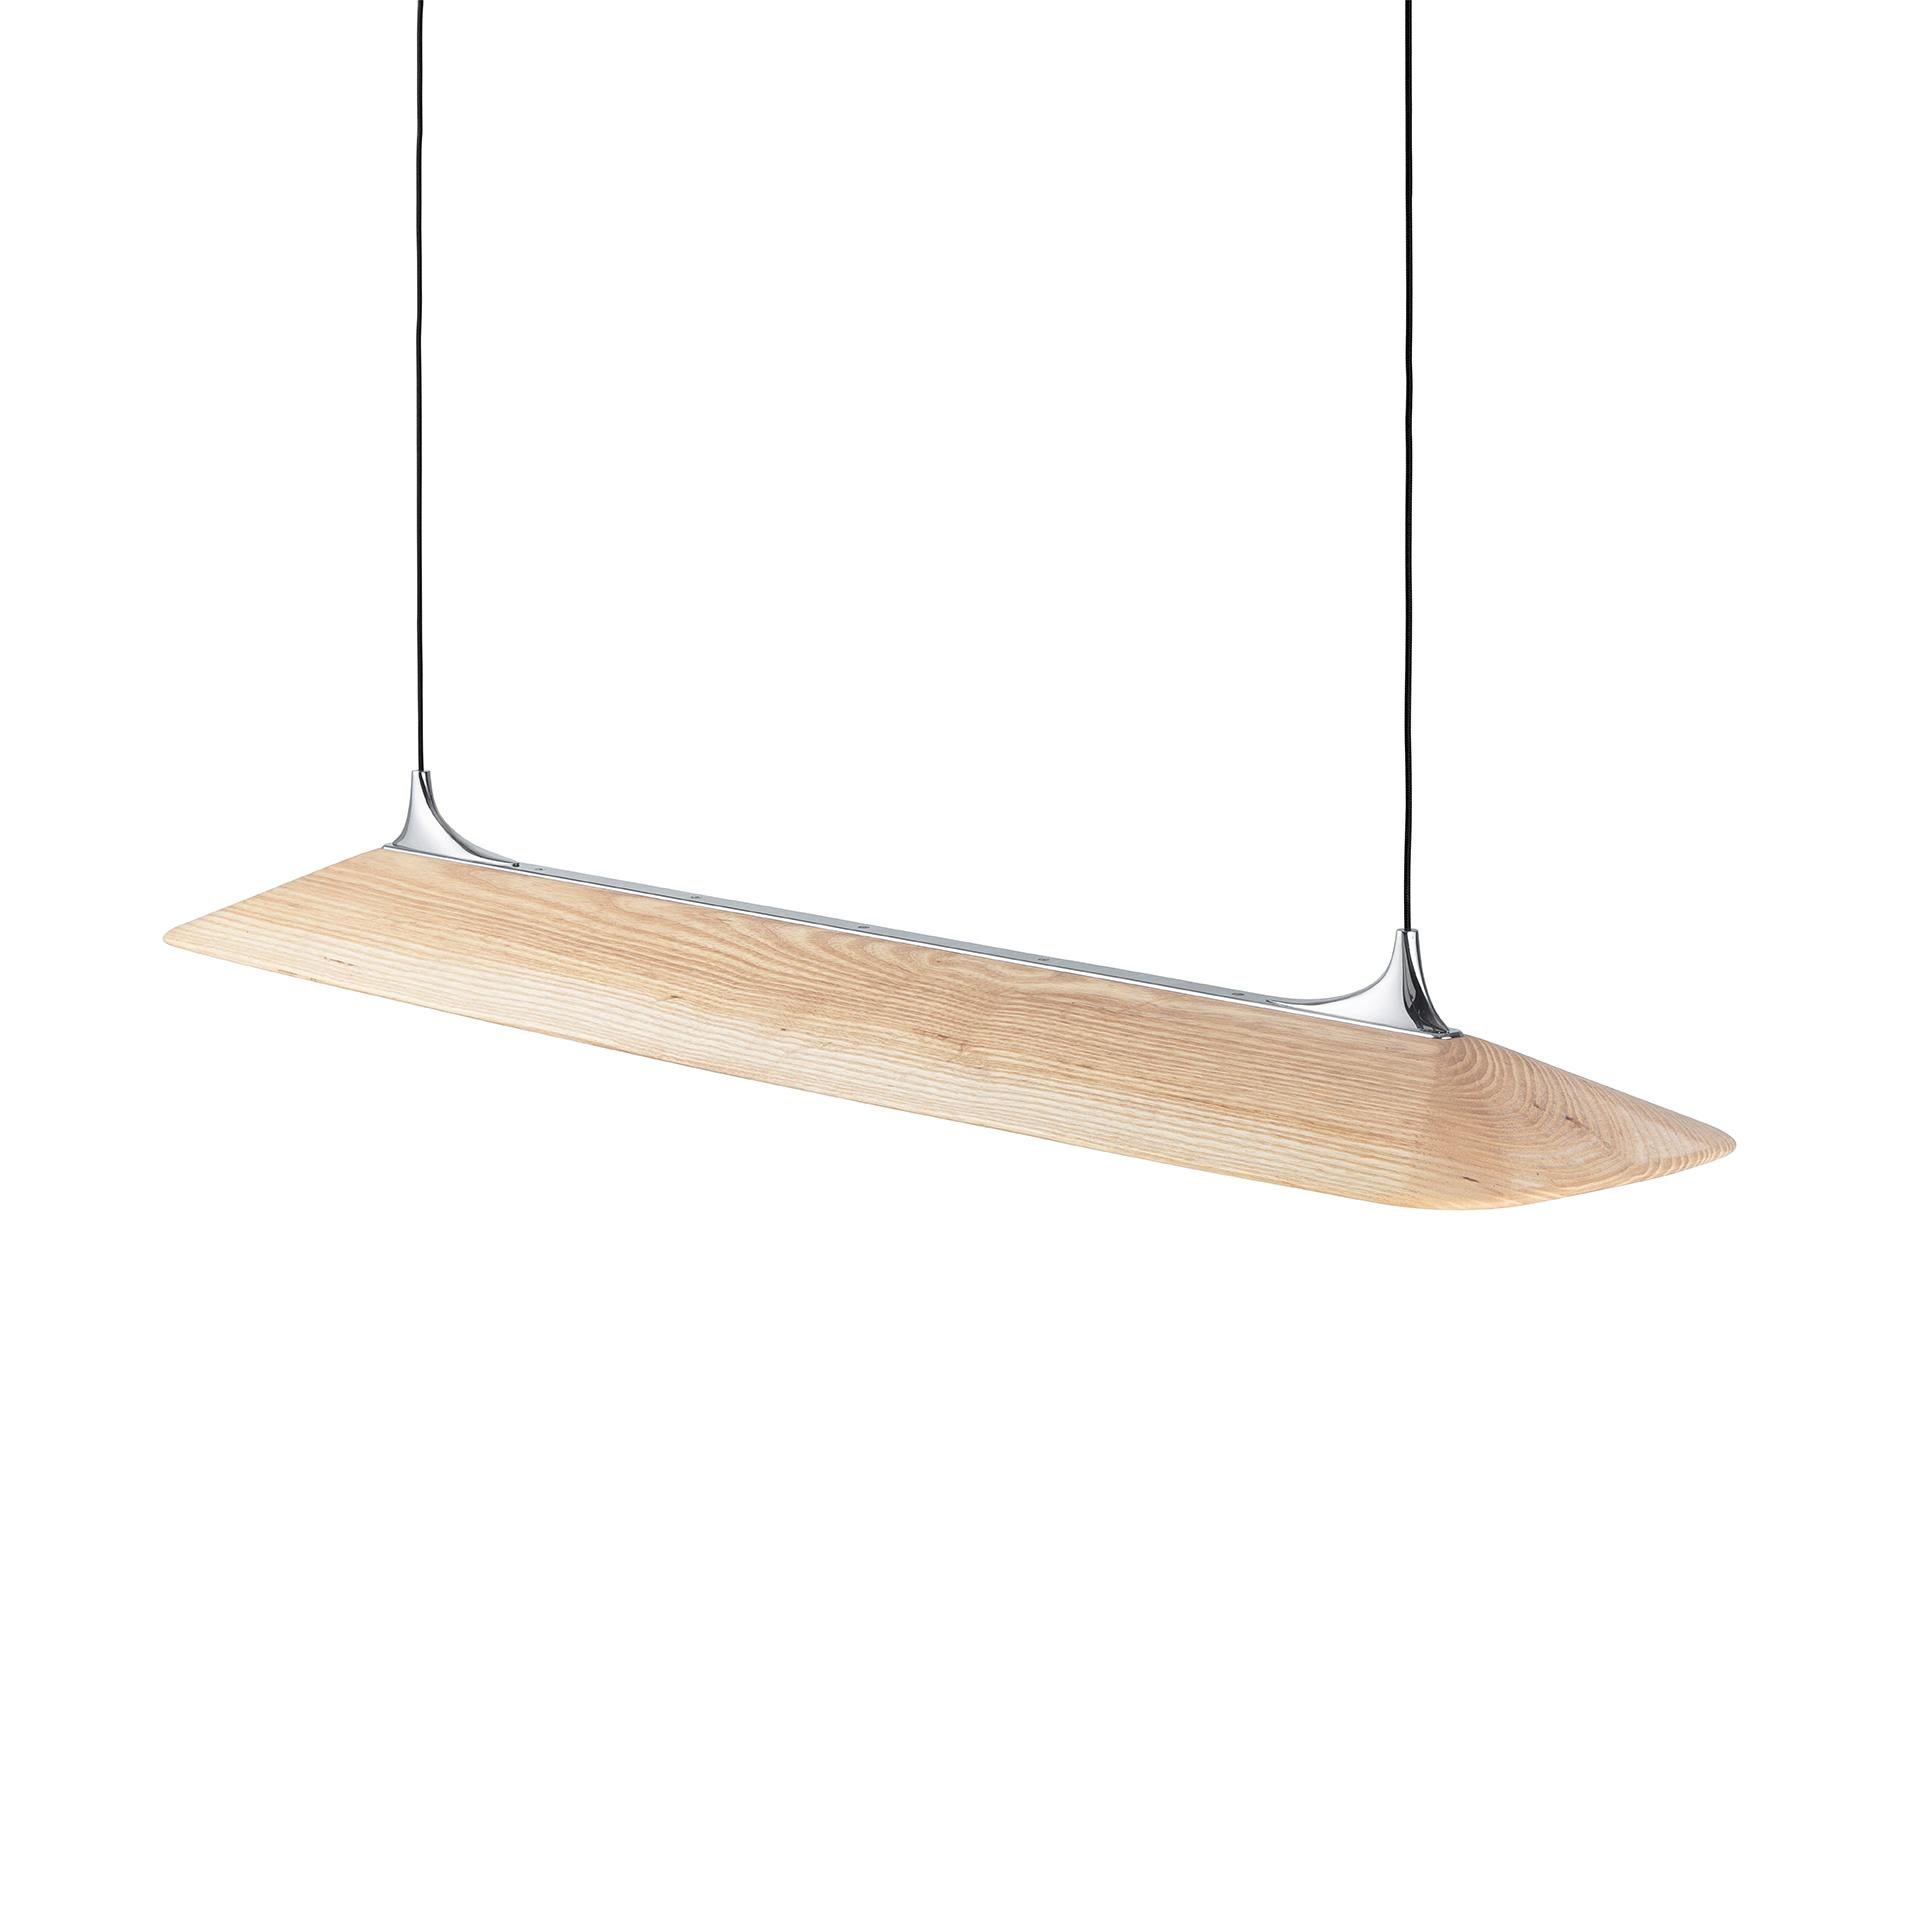 Polished 21st Century Handcrafted Scandinavian Ceiling Light in Ash and Chromed Brass